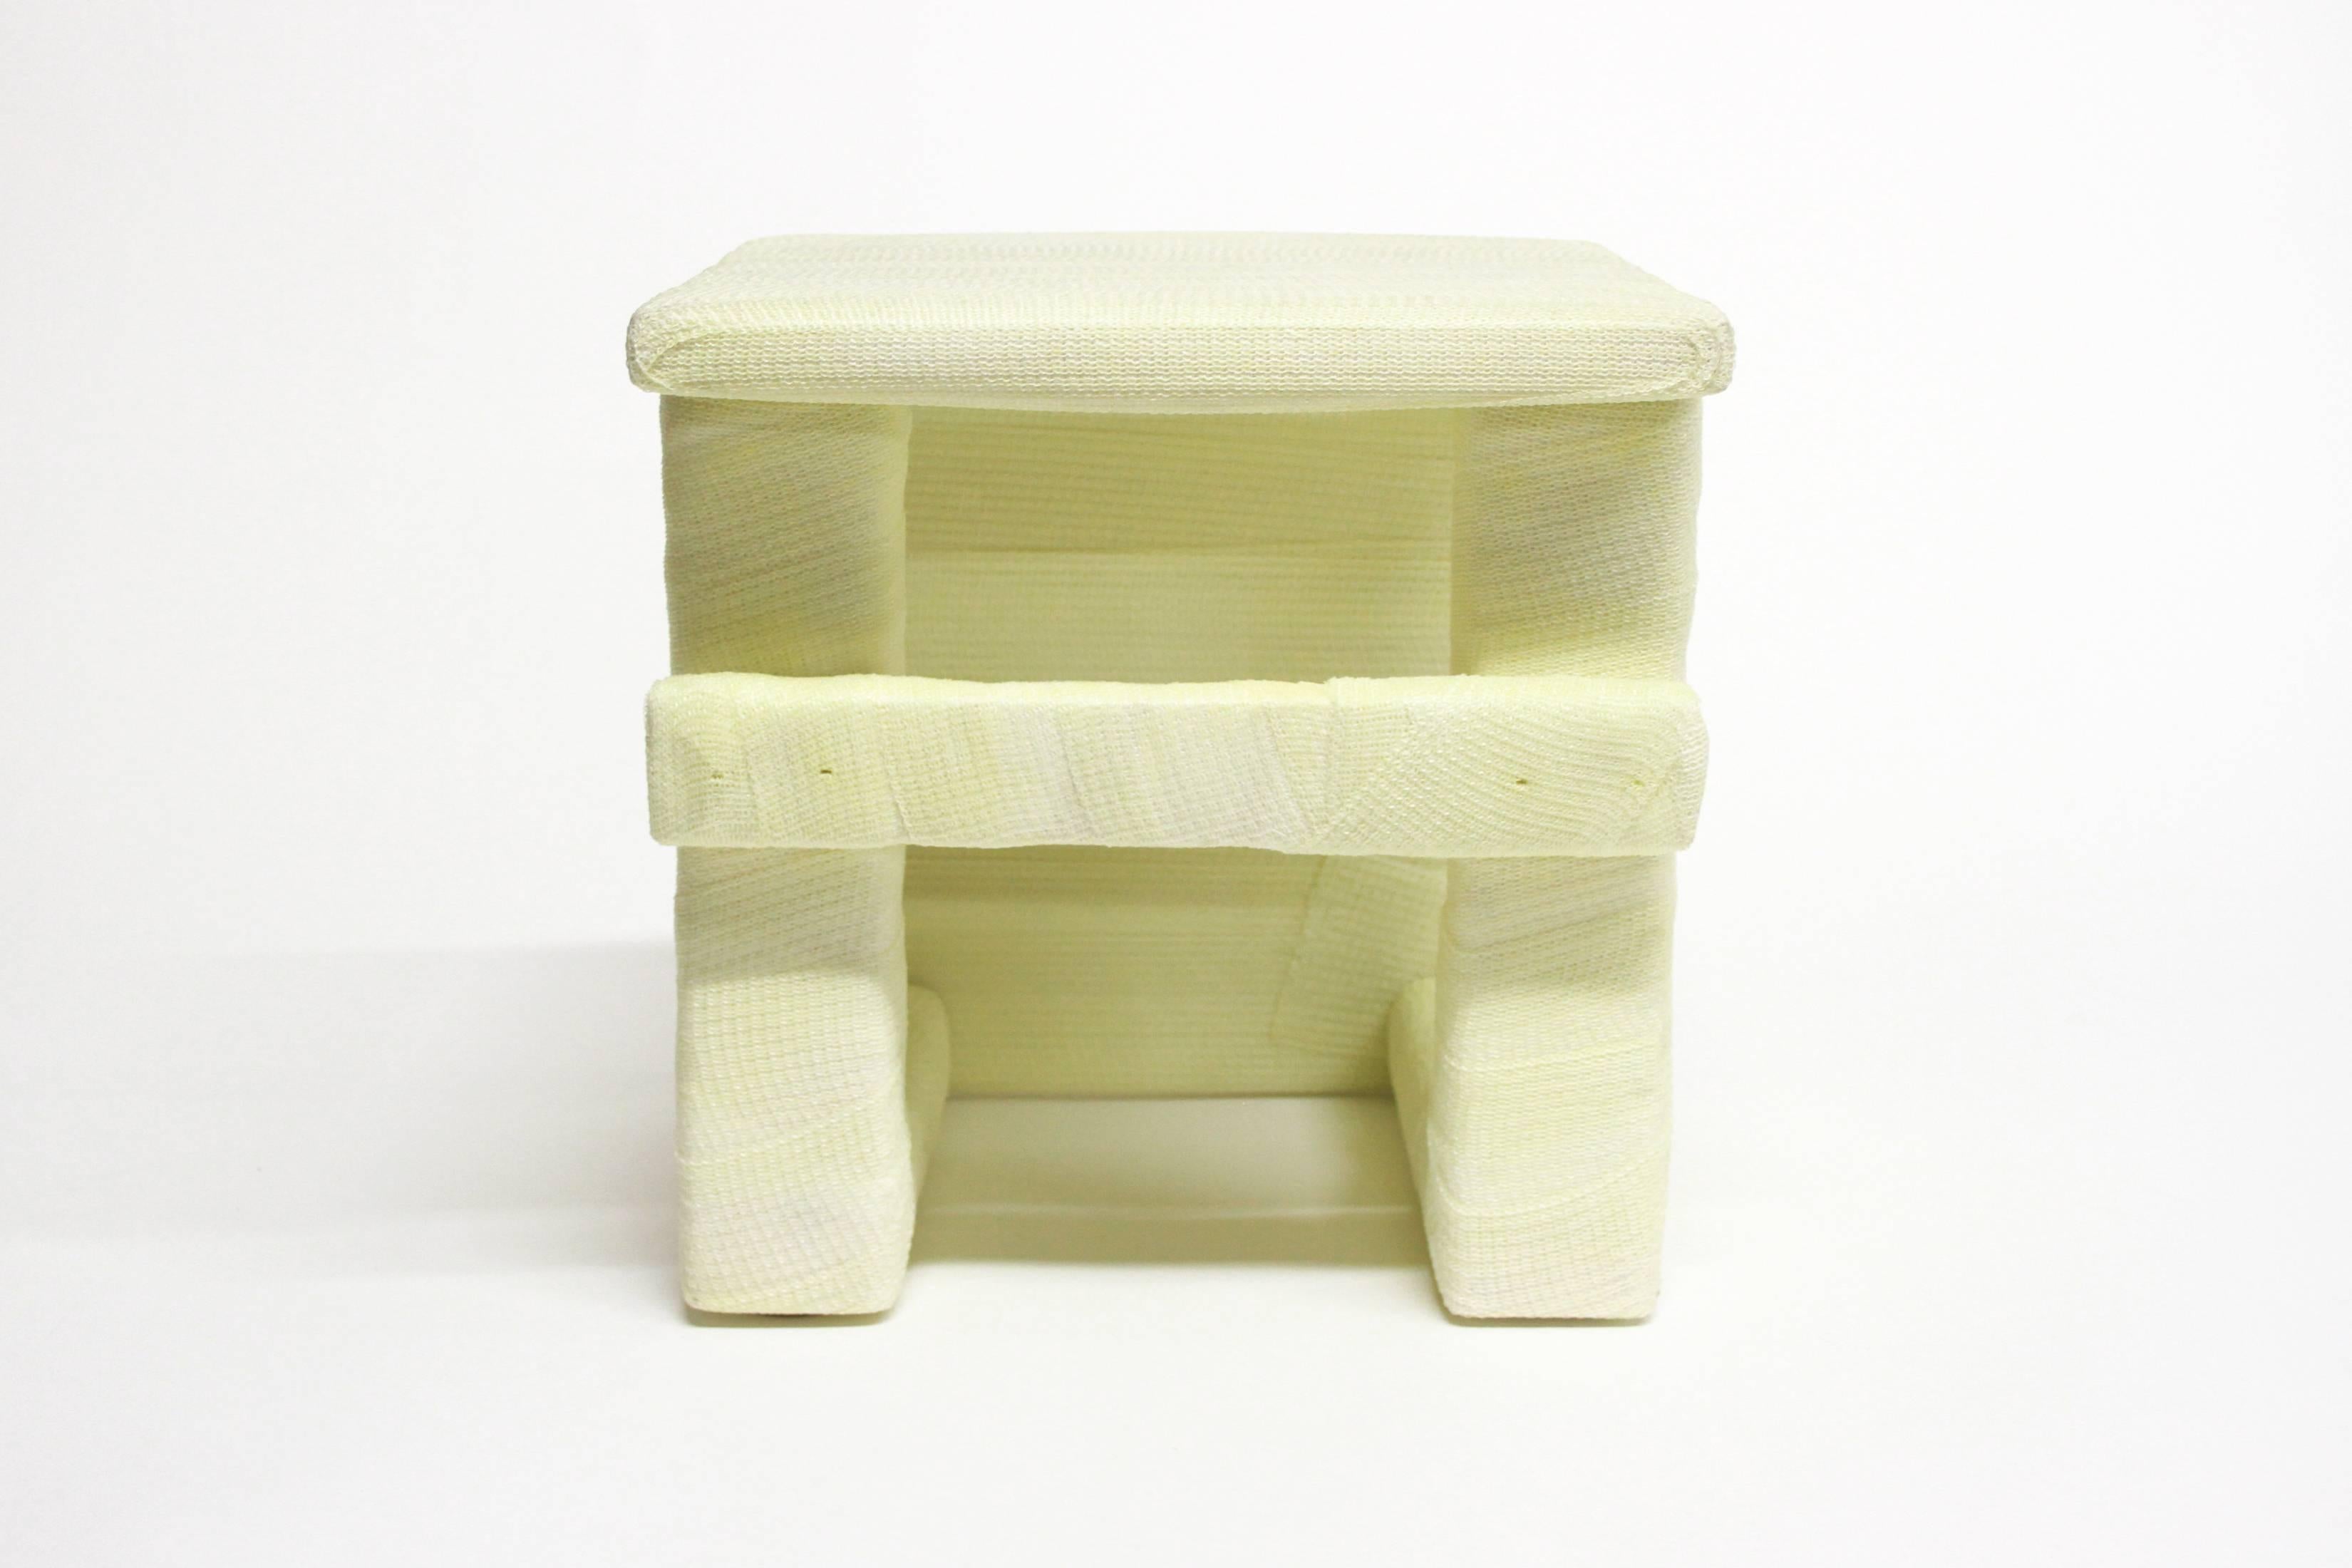 Post-Modern Stool VI, Modern Seating and Sculpture in Medical Cast Tape